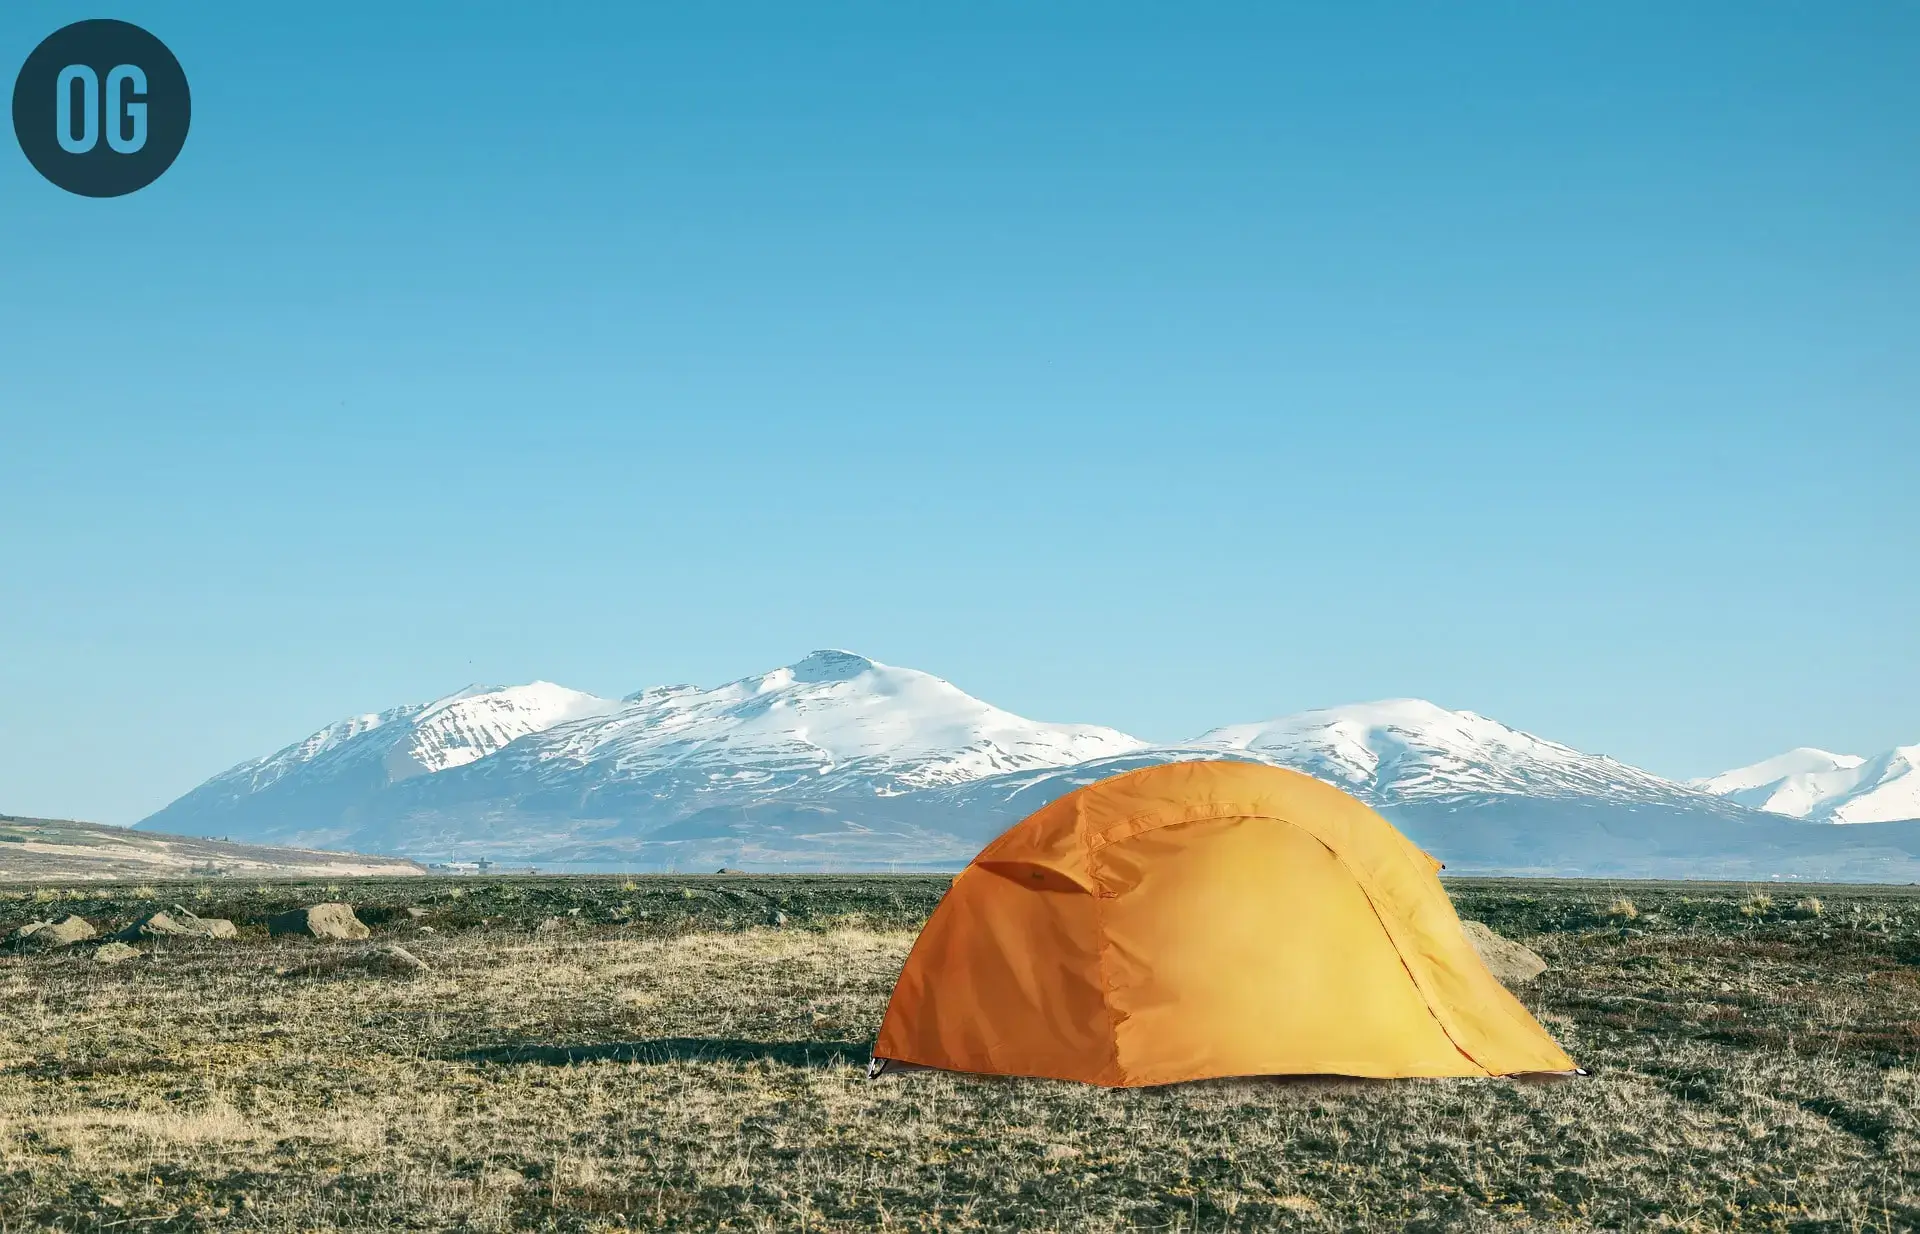 Amazon Basics Lightweight Camping Tent Review